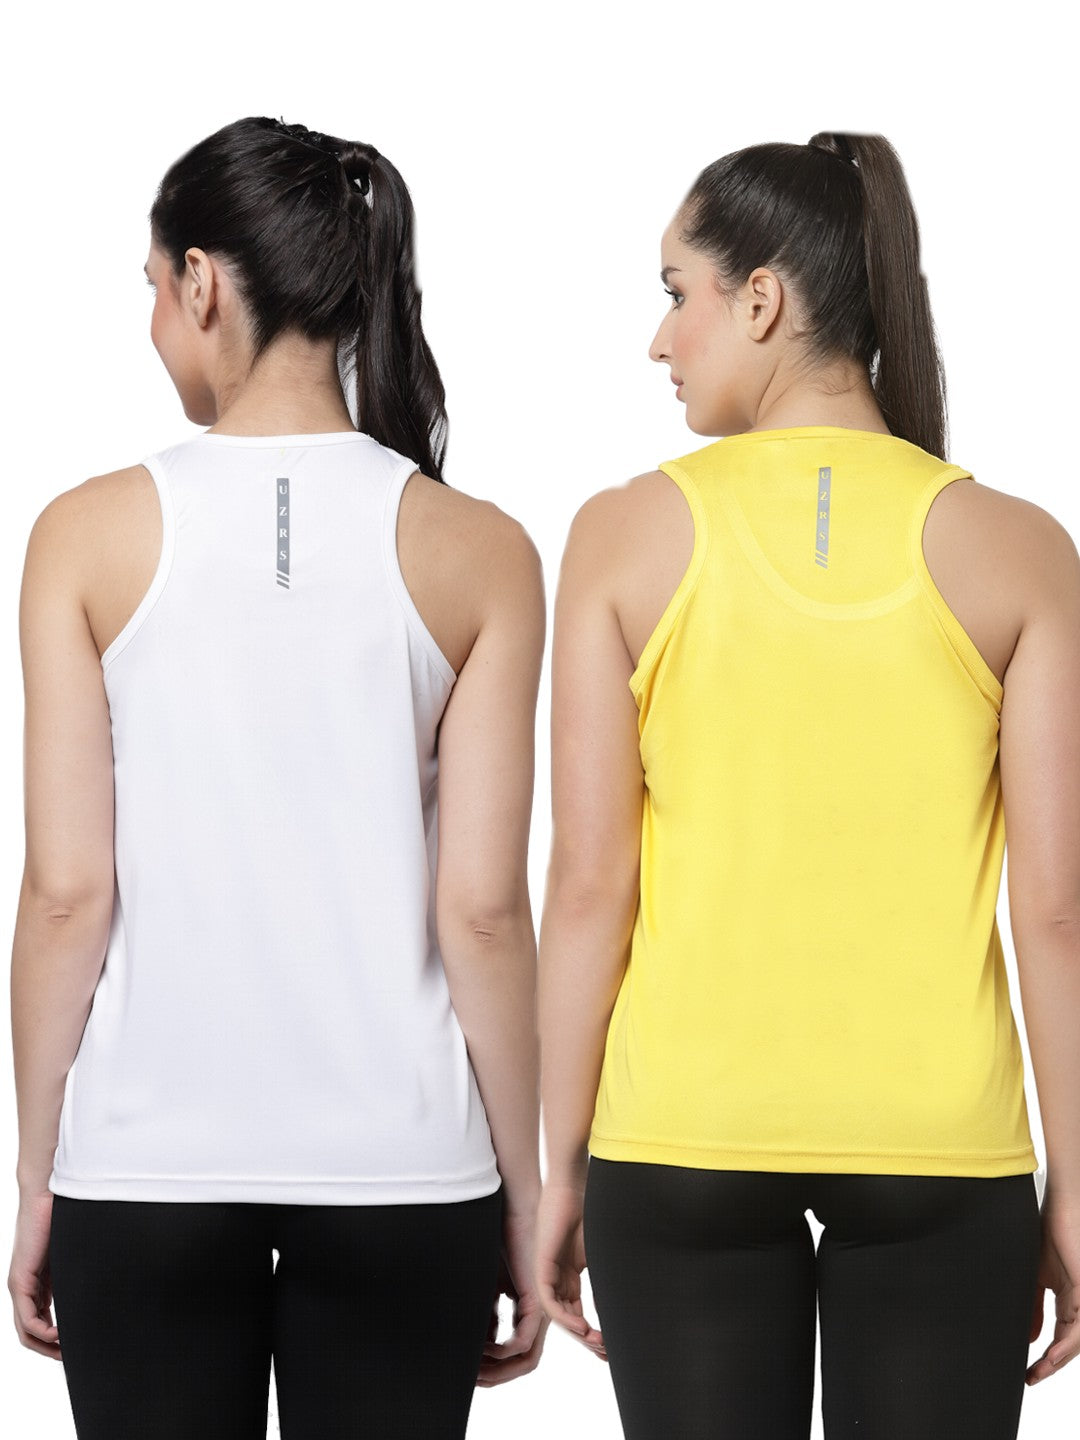 UZARUS Women's Dry Fit Workout Tank Top Sports Gym T-Shirt (Pack Of 2)